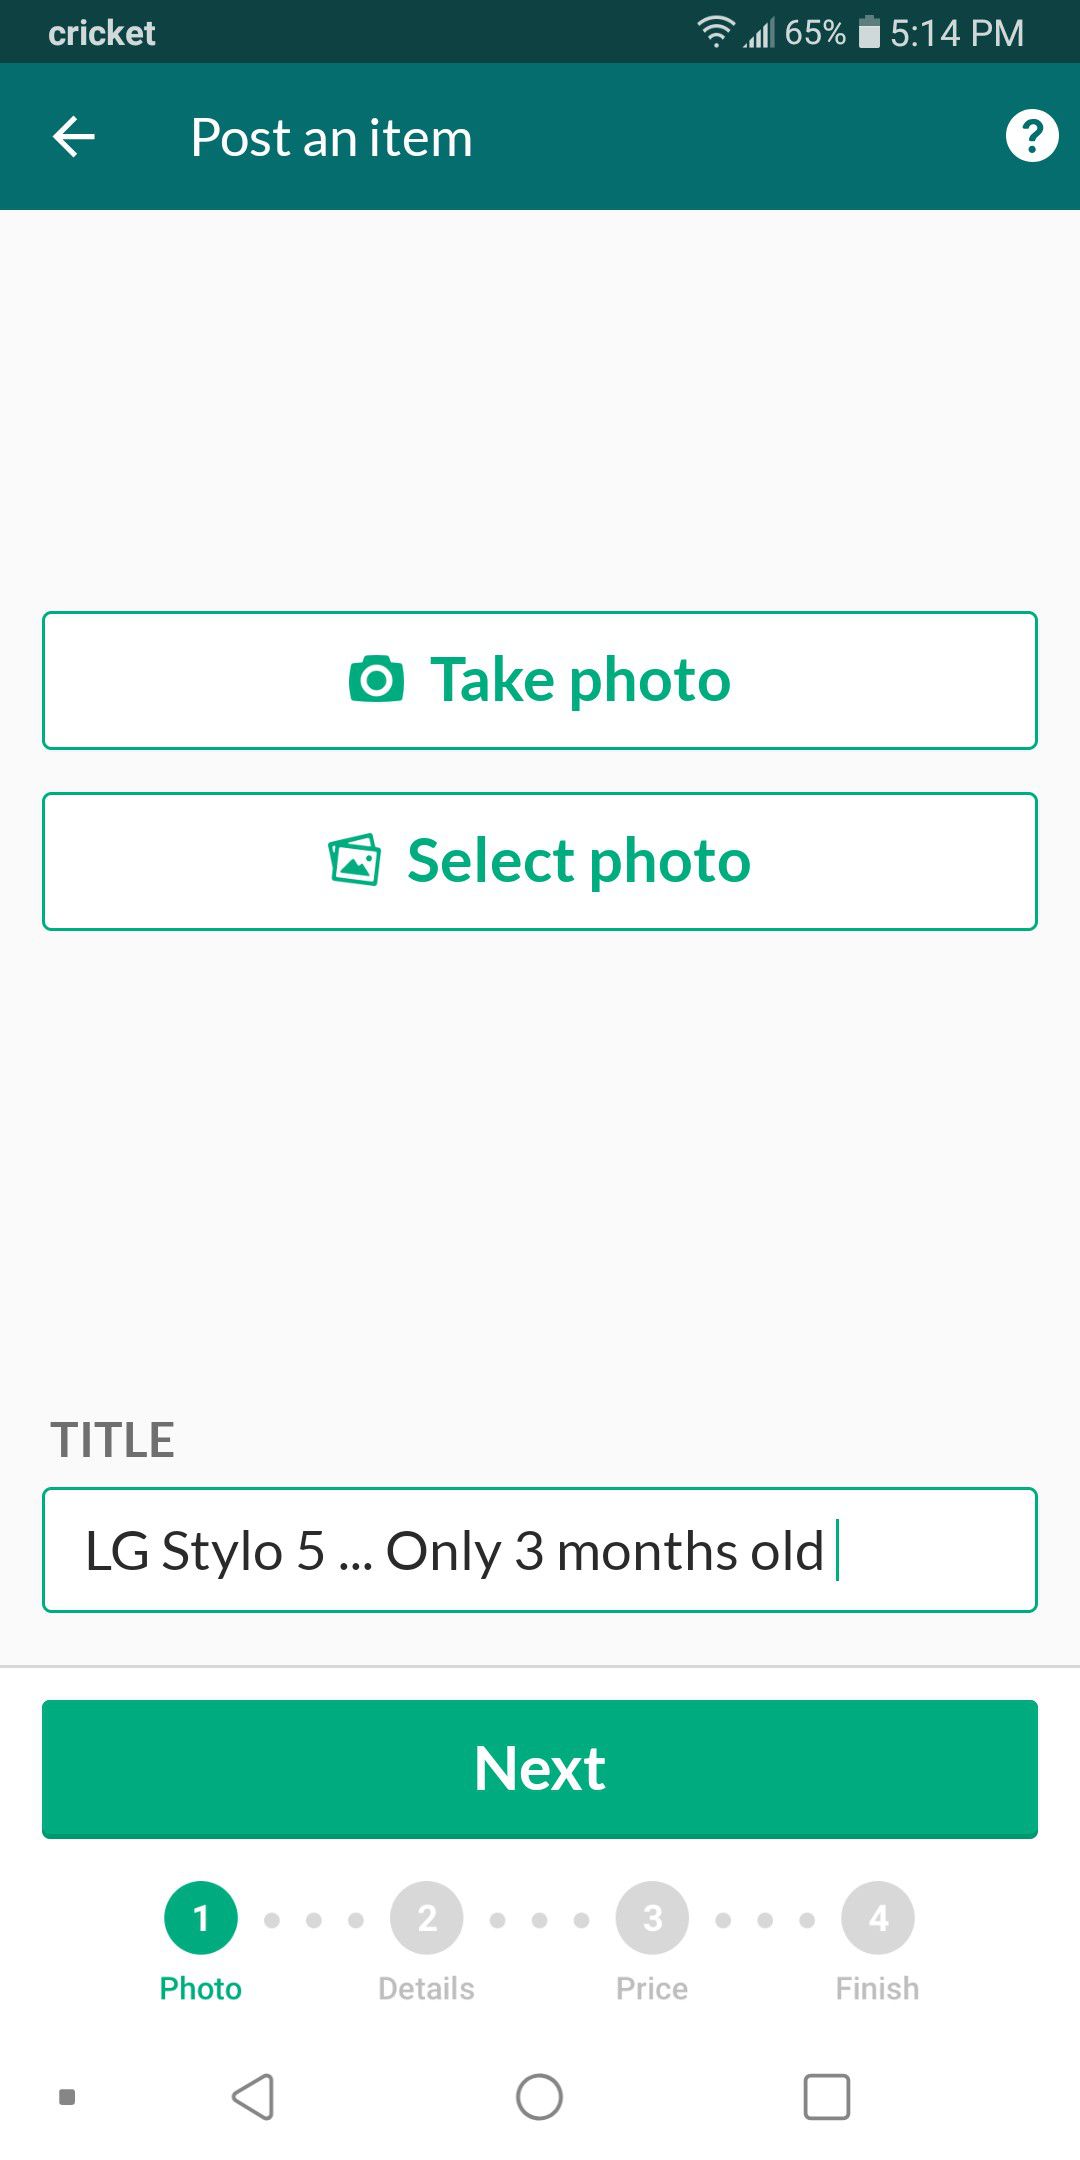 LG Stylo 5 ... Only 3 months old